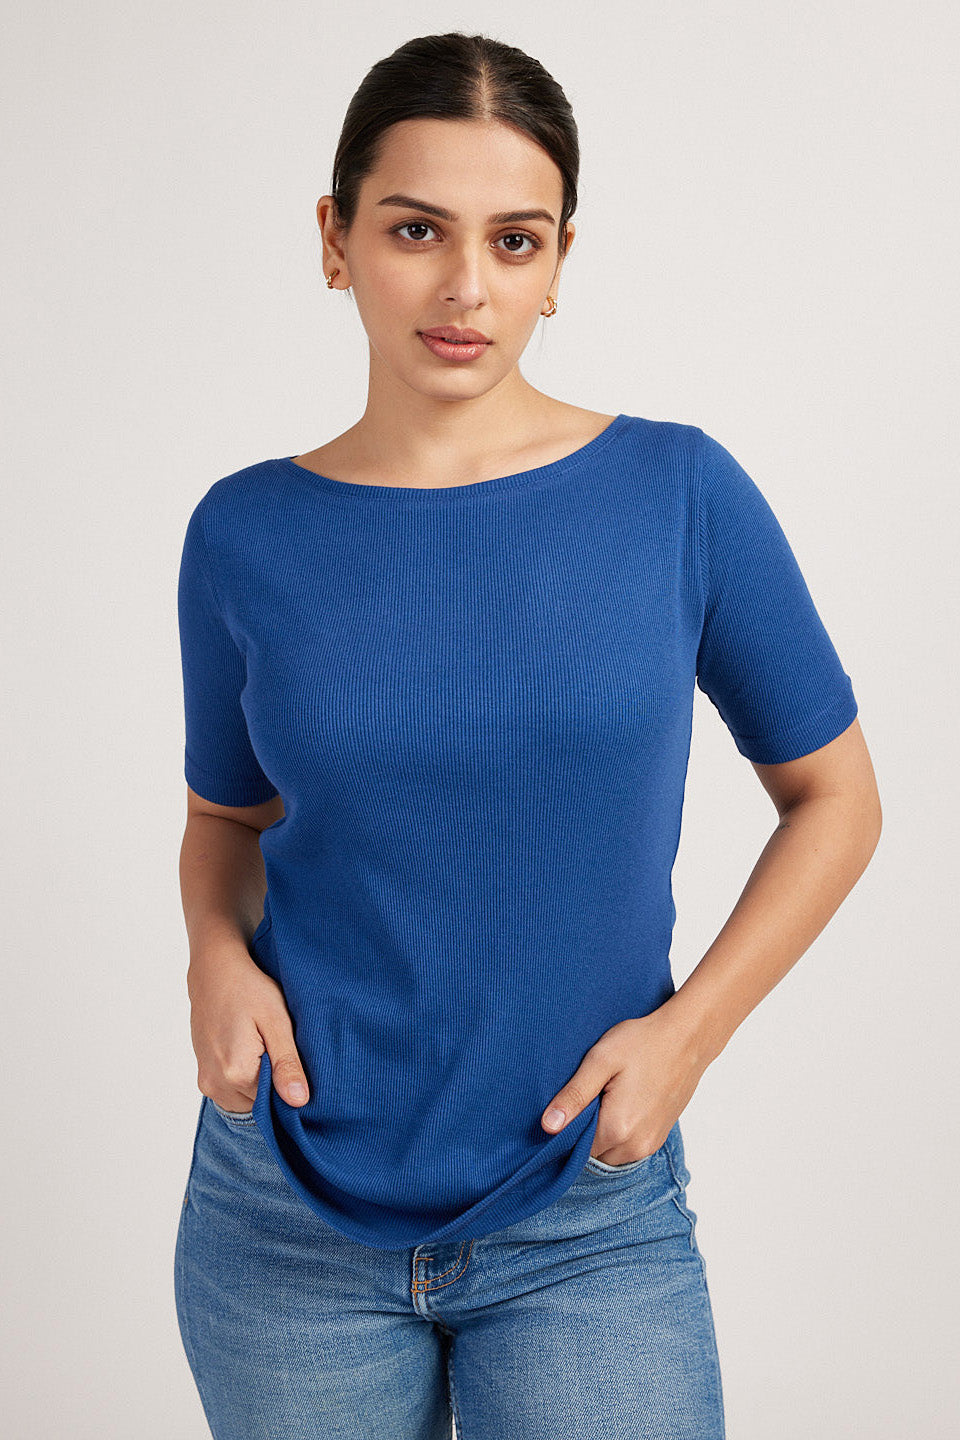 The Rib Boat Neck Tee Cobalt Blue | Womens T-Shirts | Creatures of Habit